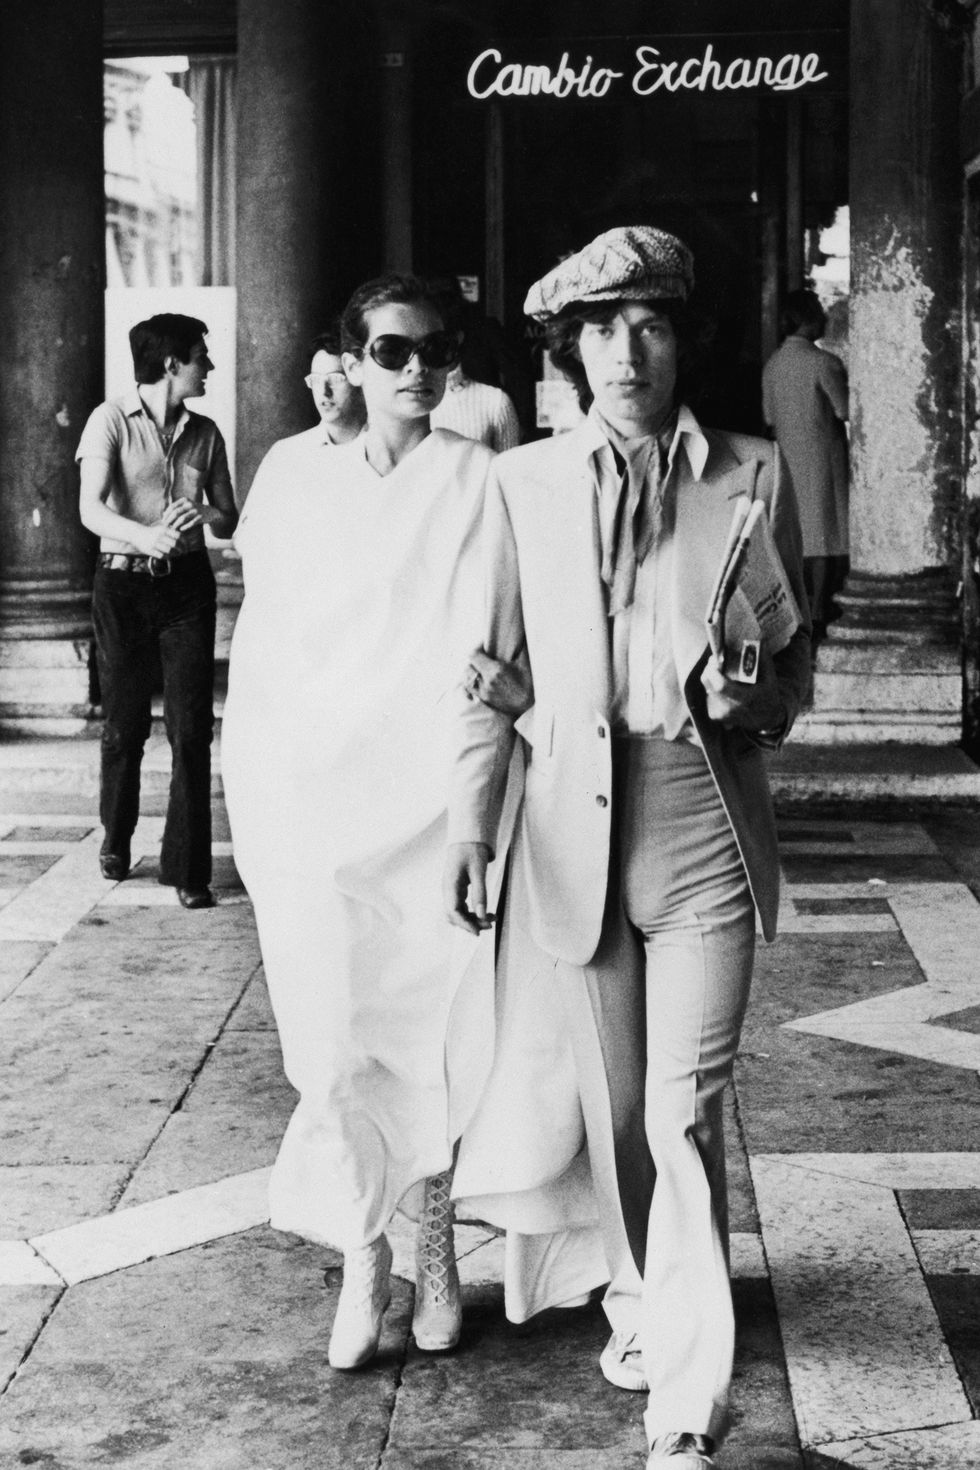 Singer Mick Jagger of the Rolling Stones and his wife Bianca on their honeymoon in Venice, 2nd June 1971. (Photo by Keystone/Hulton Archive/Getty Images)